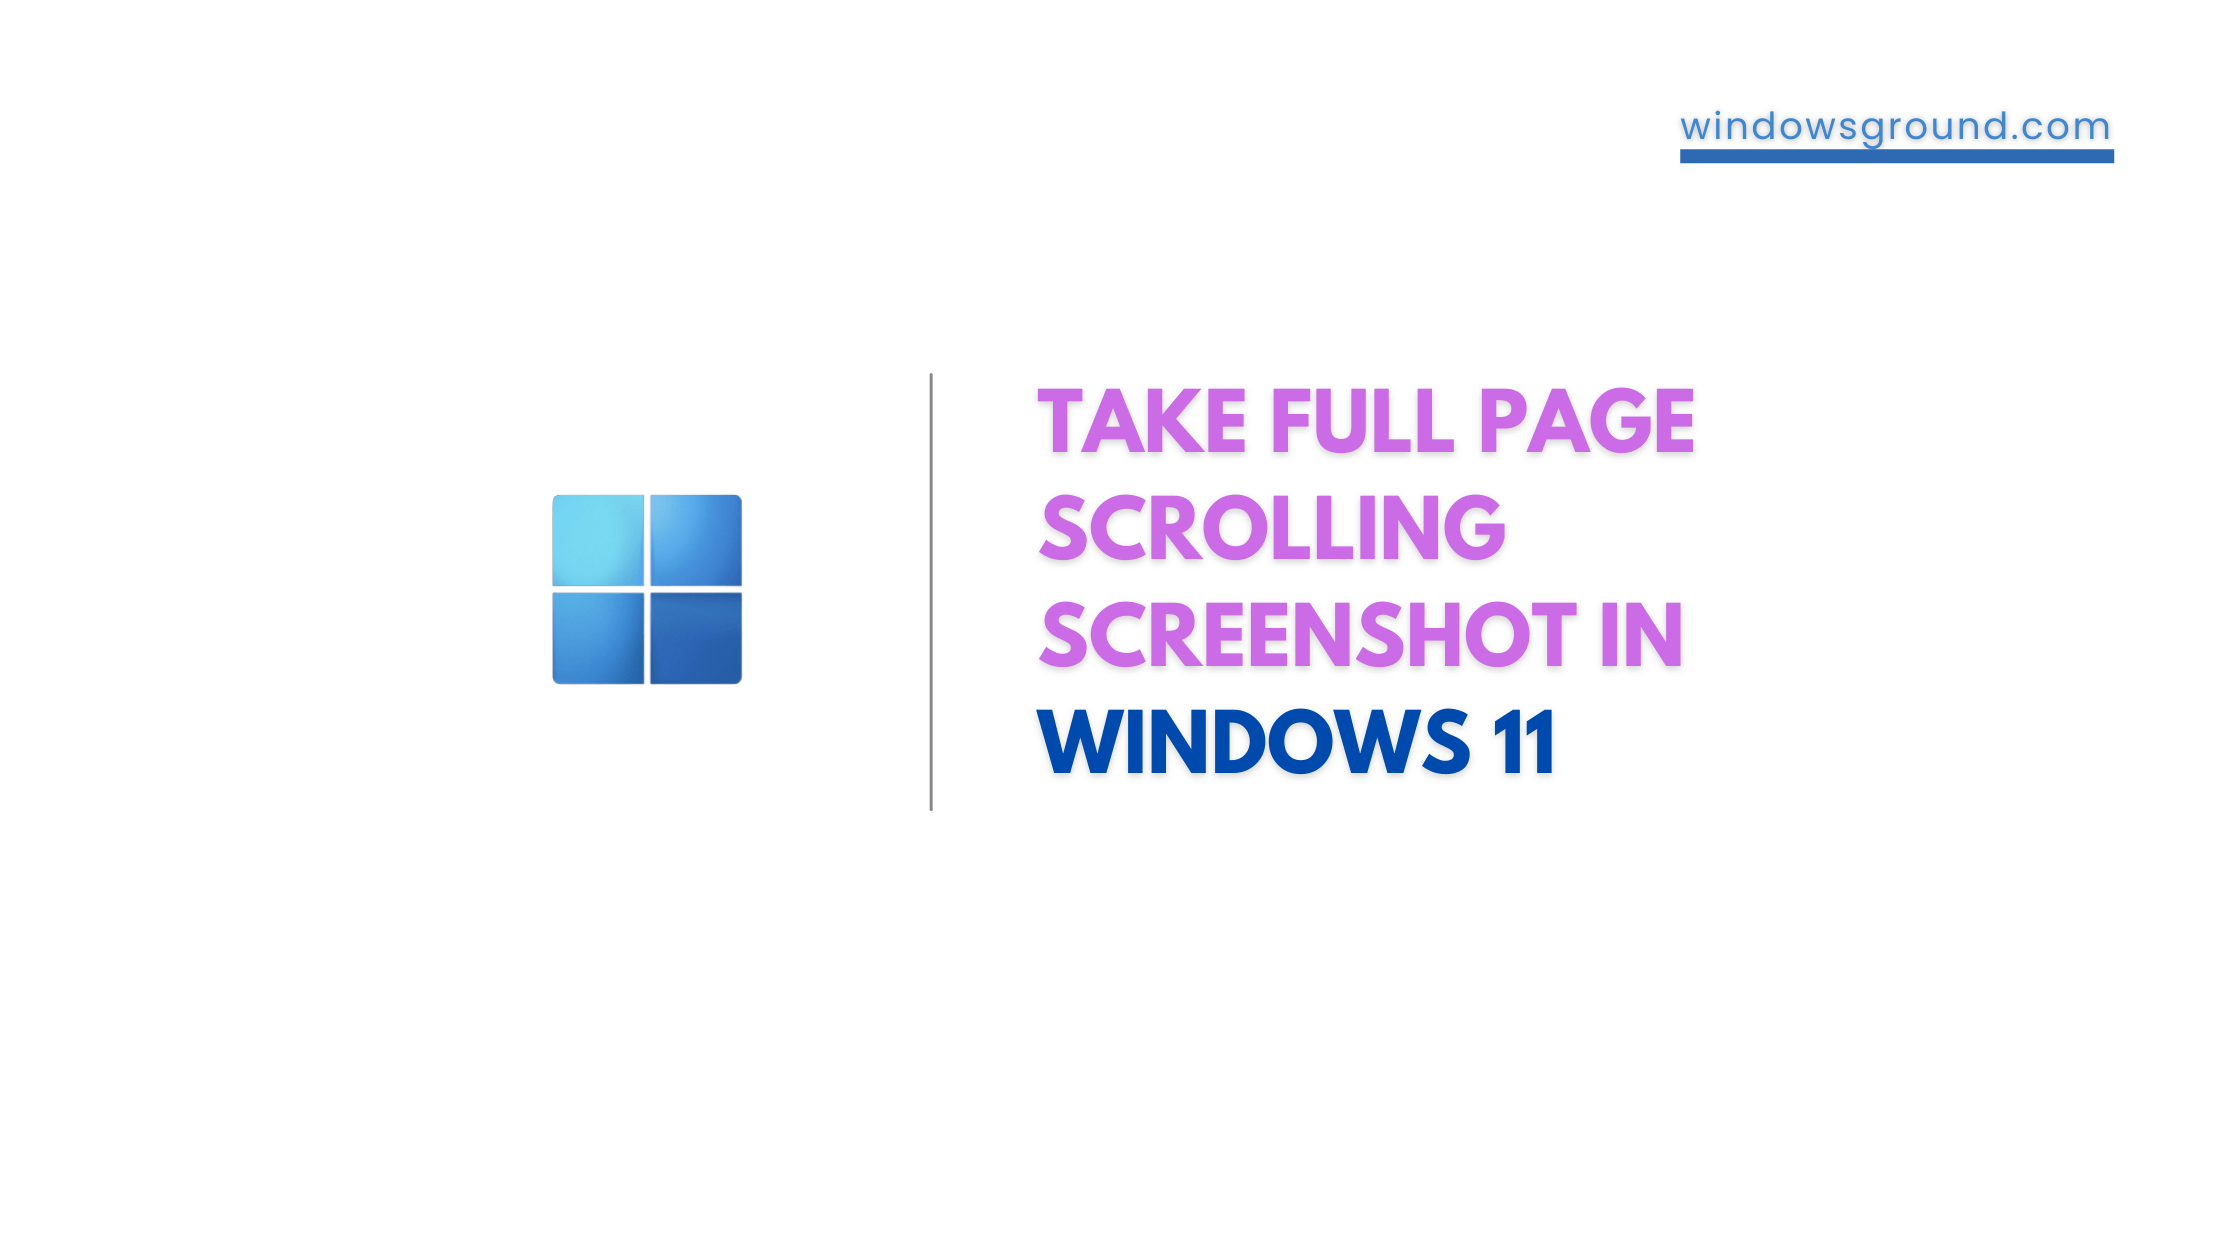 How to take full page scrolling screenshot in windows 10 or 11 easily